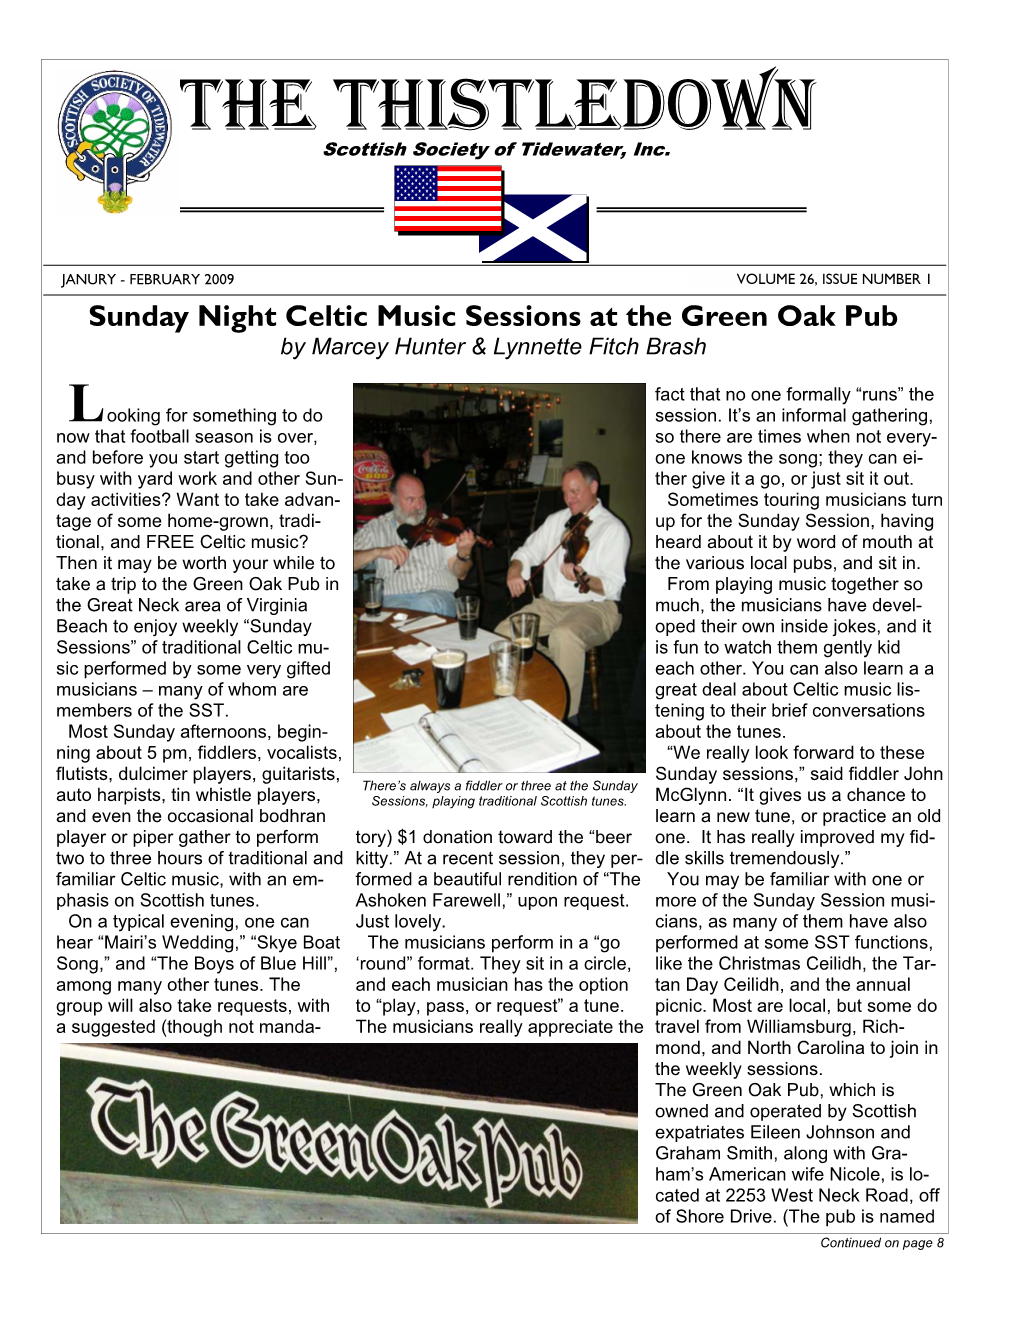 JANURY - FEBRUARY 2009 VOLUME 26, ISSUE NUMBER 1 Sunday Night Celtic Music Sessions at the Green Oak Pub by Marcey Hunter & Lynnette Fitch Brash